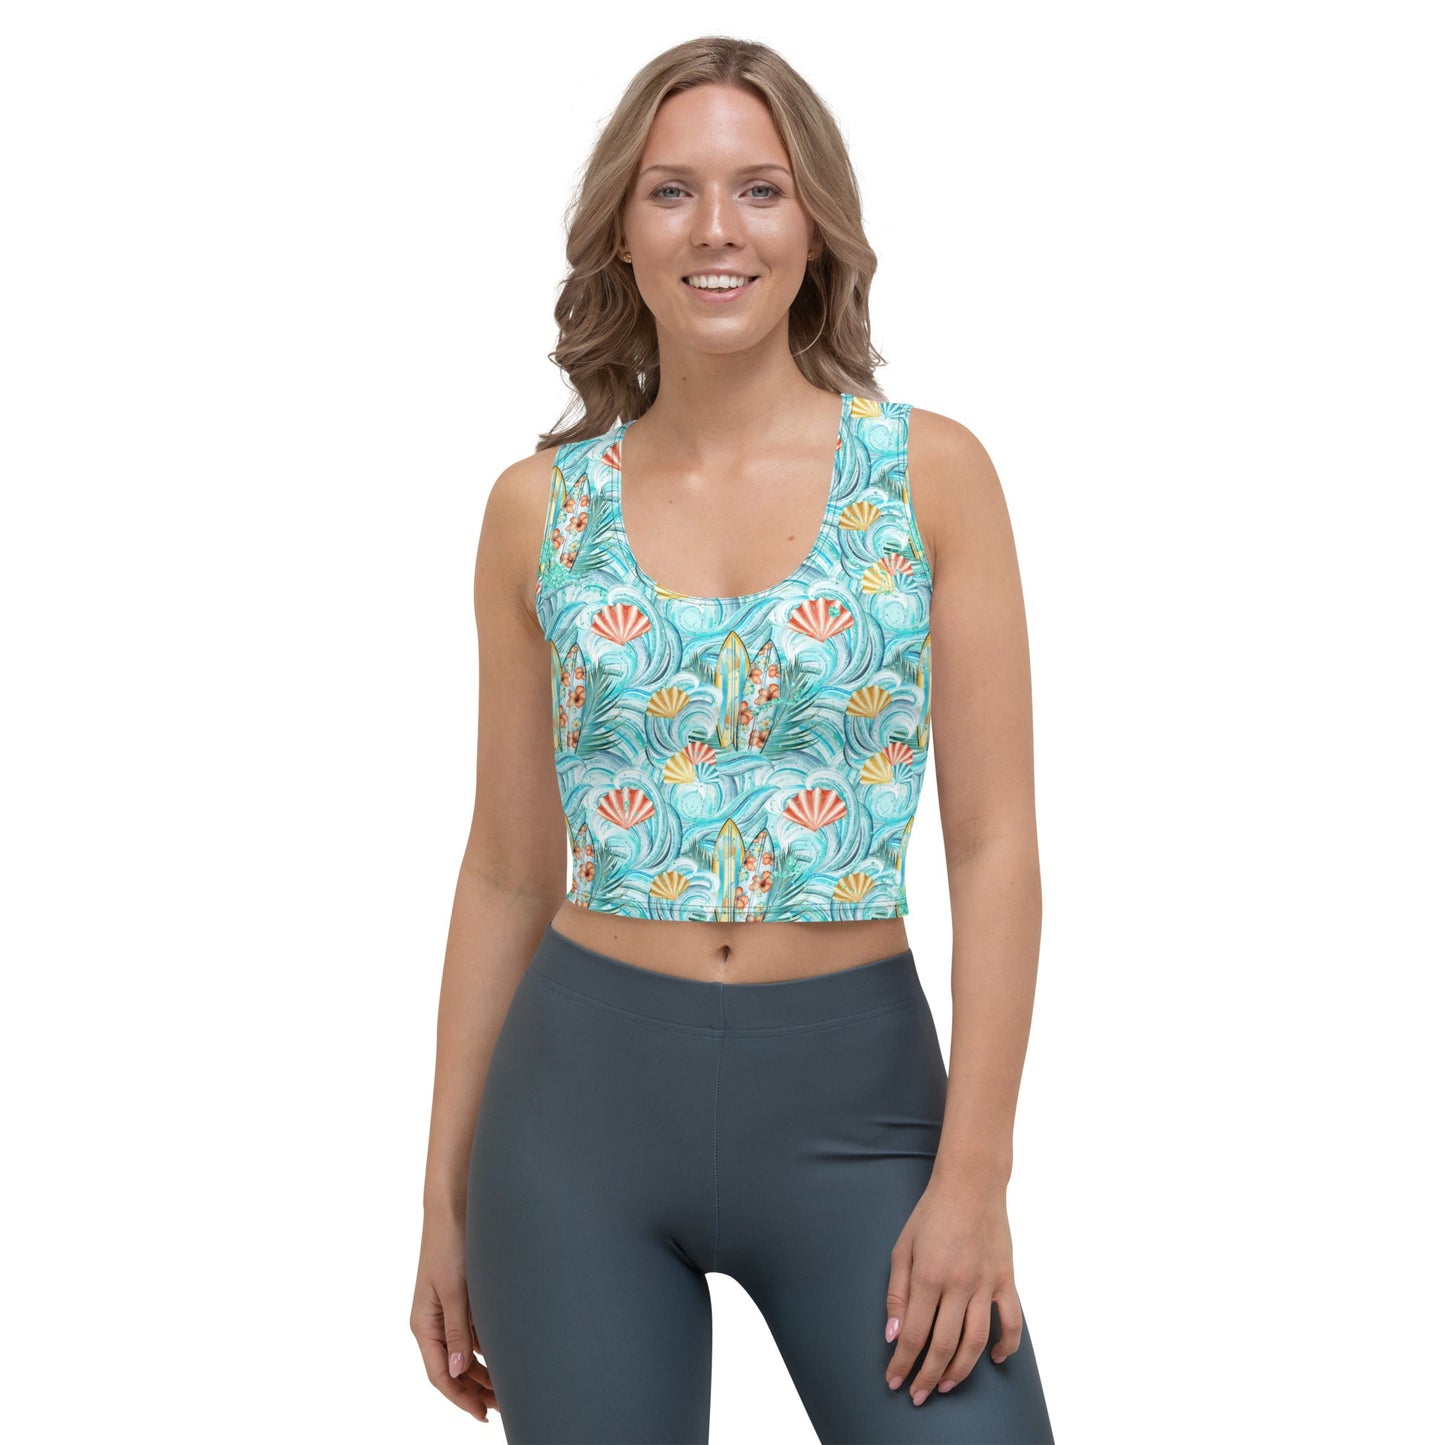 Be Extra! Summer Vibes Crop Top - BeExtra! Apparel & More